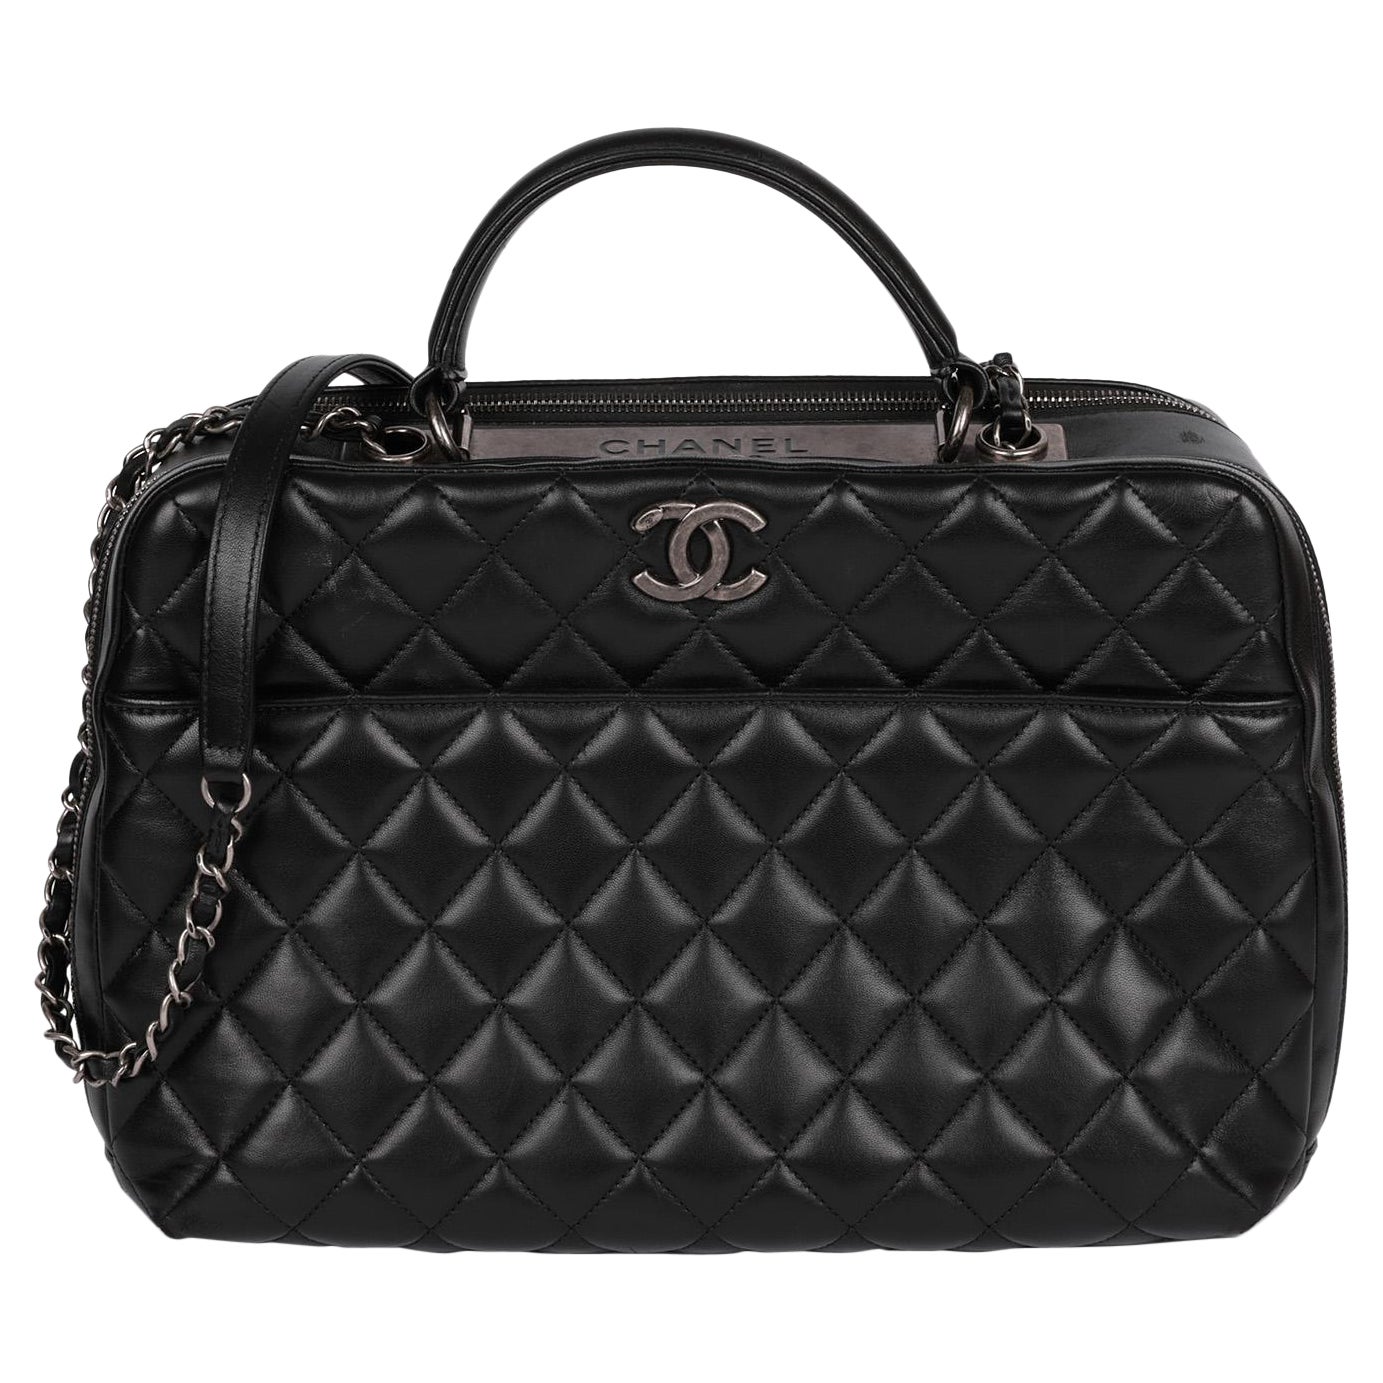 Chanel Black Quilted Lambskin Large Trendy CC Bowling Bag For Sale